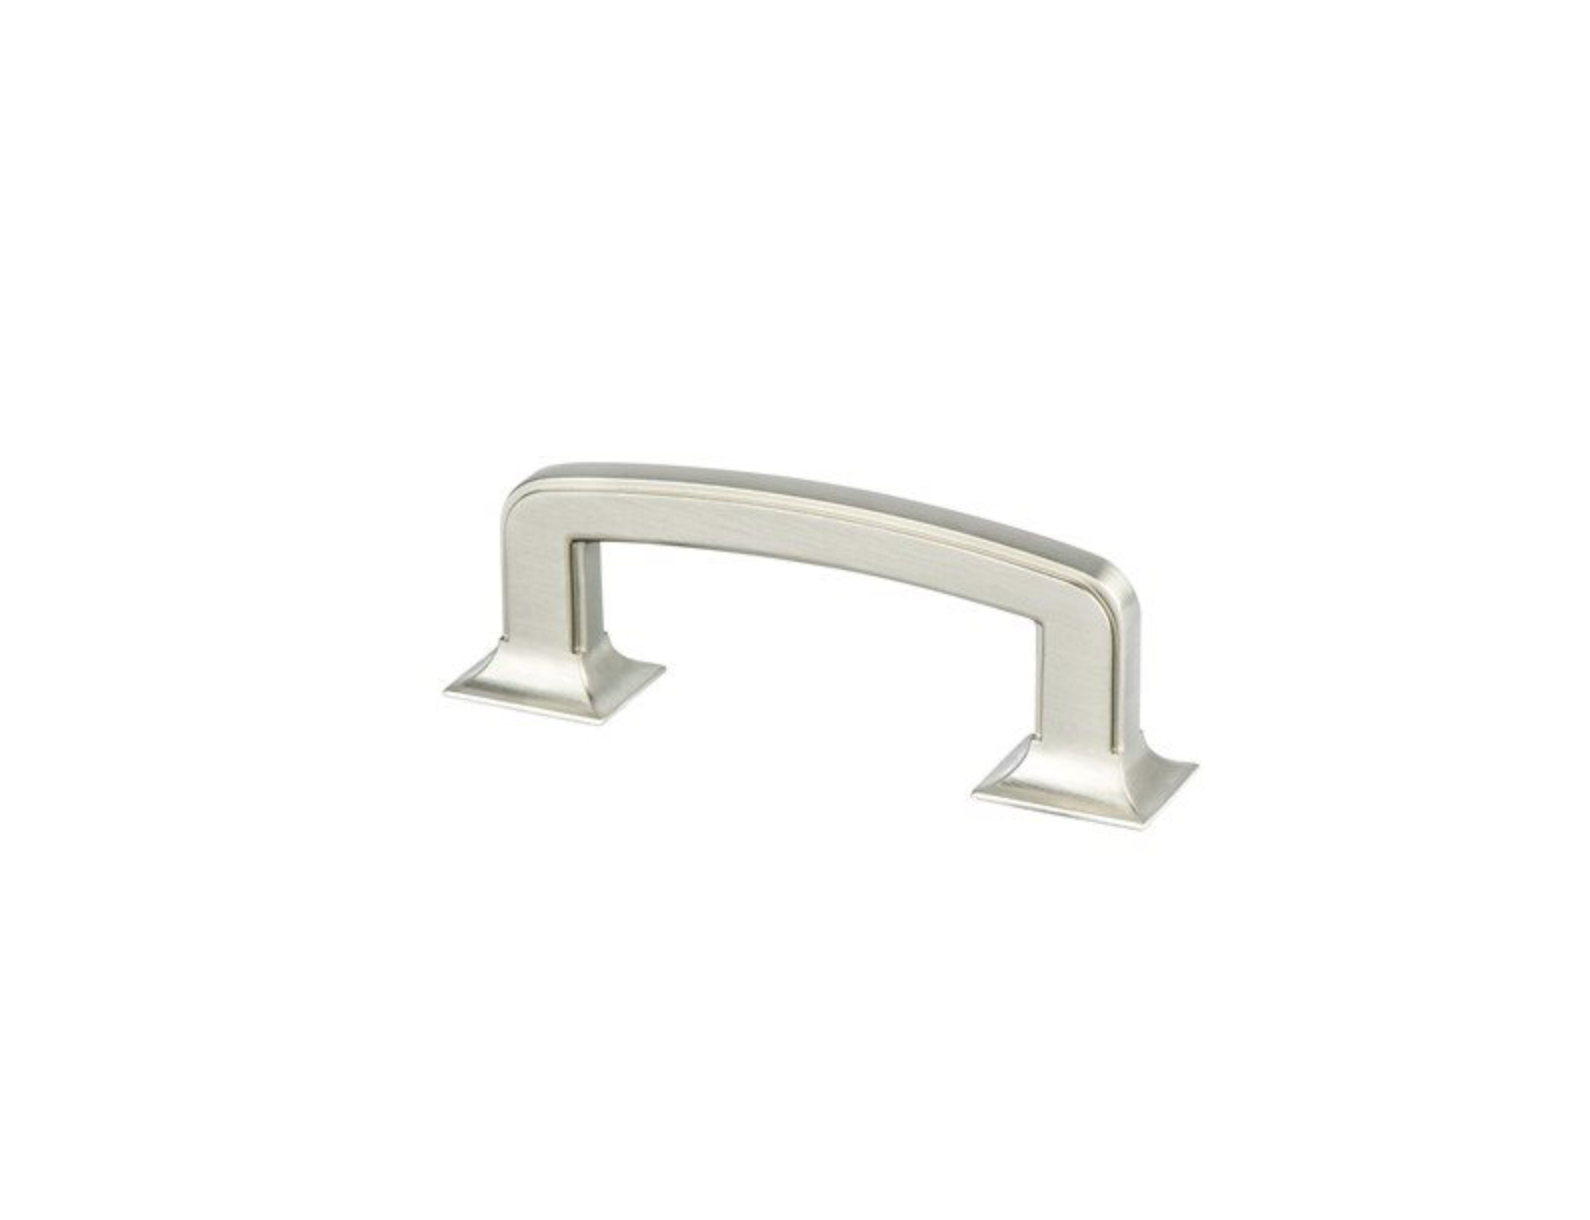 Brushed Nickel "Liana" Drawer Pulls and Knobs for Cabinets and Furniture - Industry Hardware